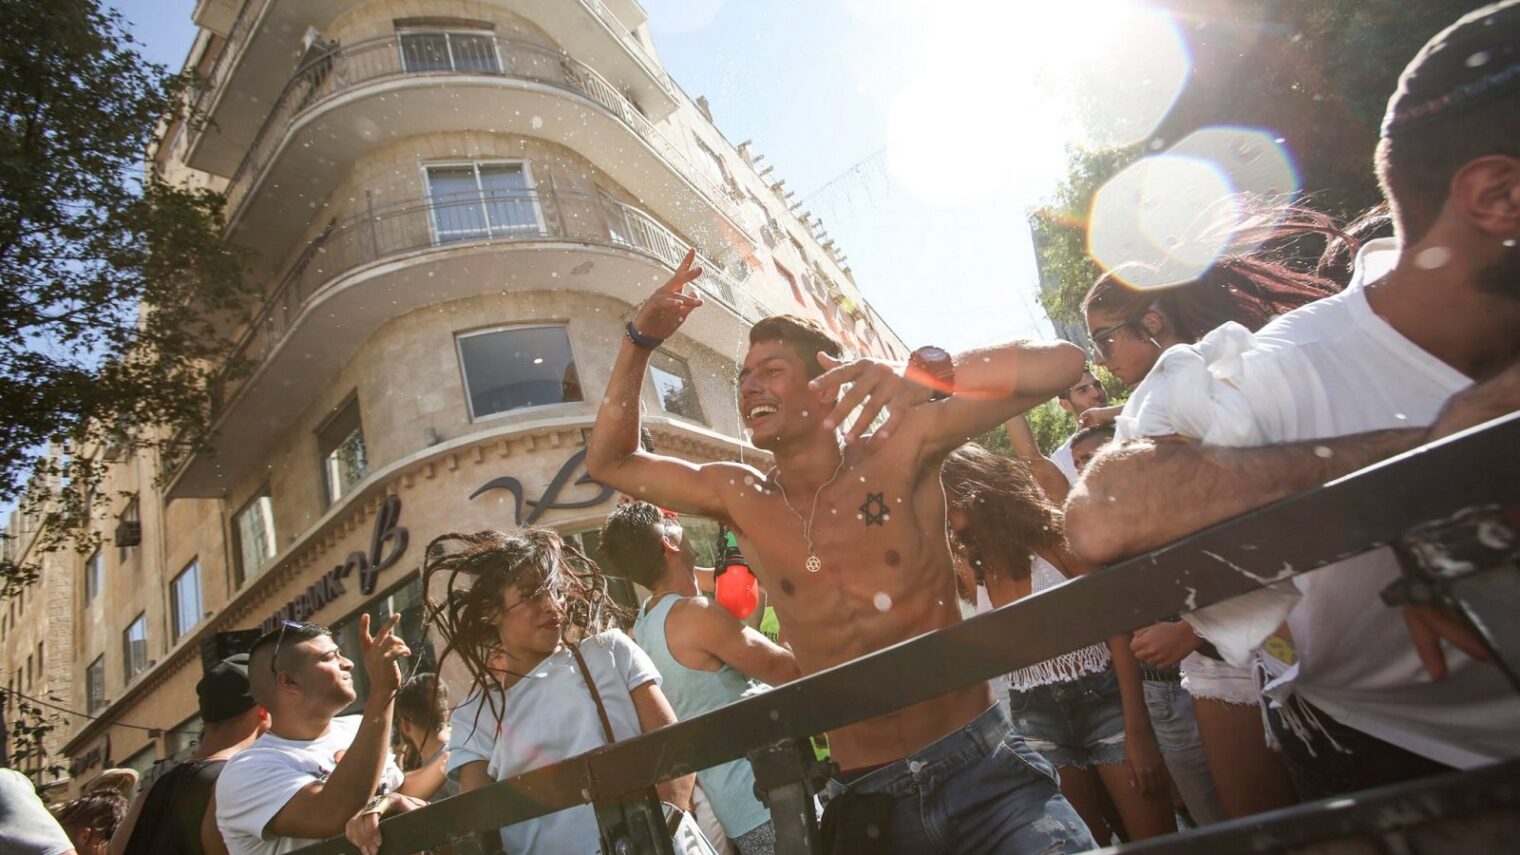 Because people in Israel know how to party. Israelis enjoy dancing at a party in Ben Yehuda Street in Jerusalem. Photo by Shlomi Cohen/FLASH90